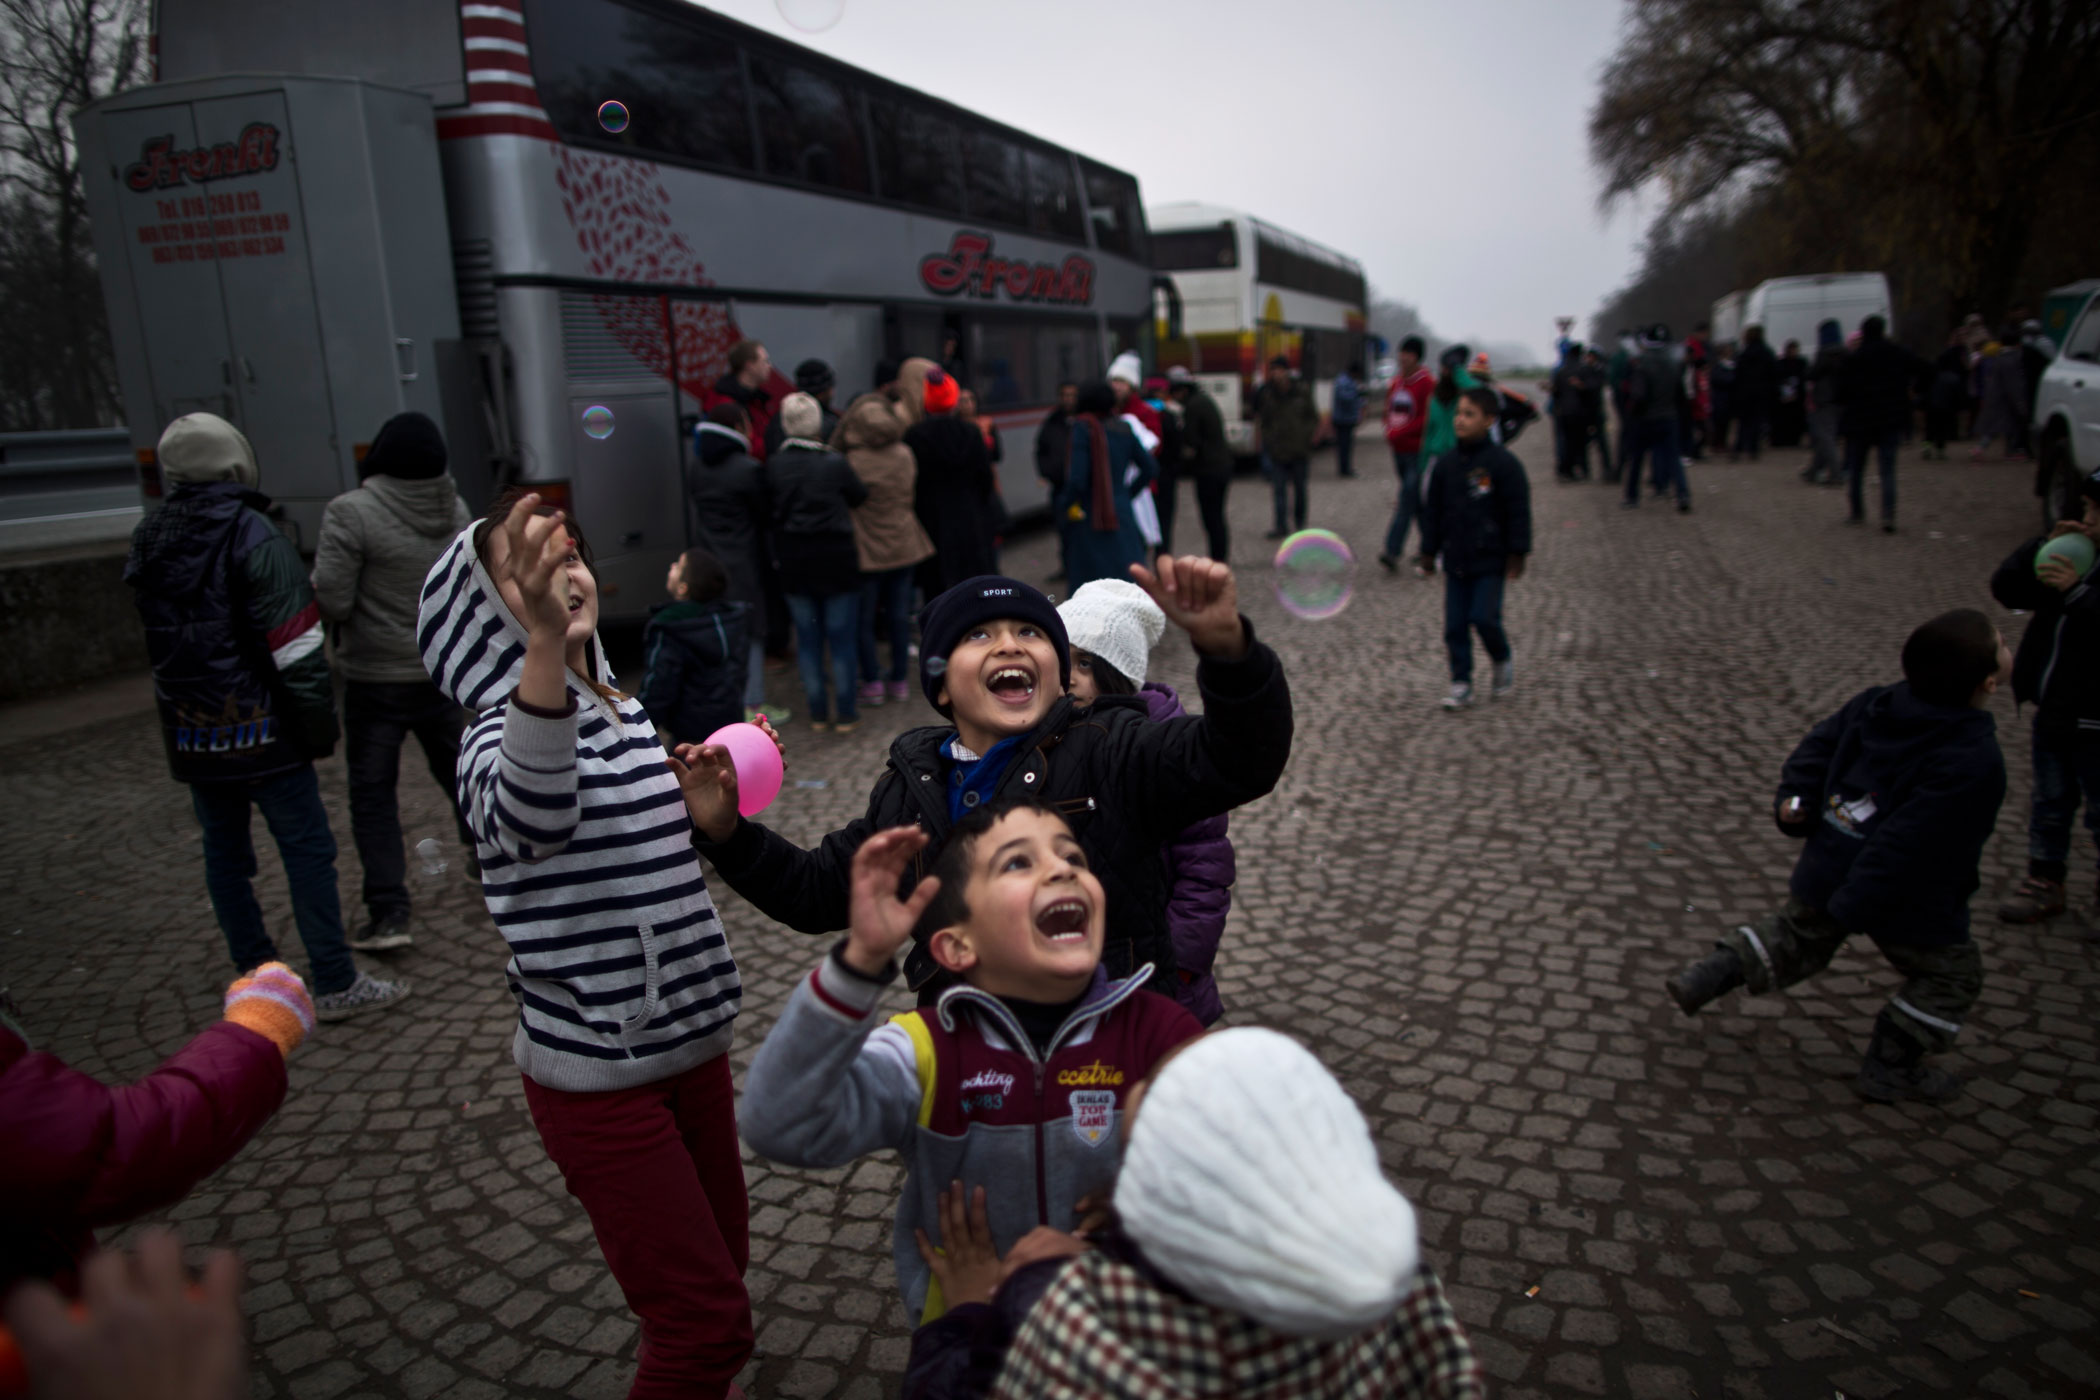 Dildar Qasu, 10, chases bubbles with other children in Adasevci, Serbia, while waiting to be transported via bus to Sid, where authorities load trains headed to Croatia, Dec. 6, 2016.